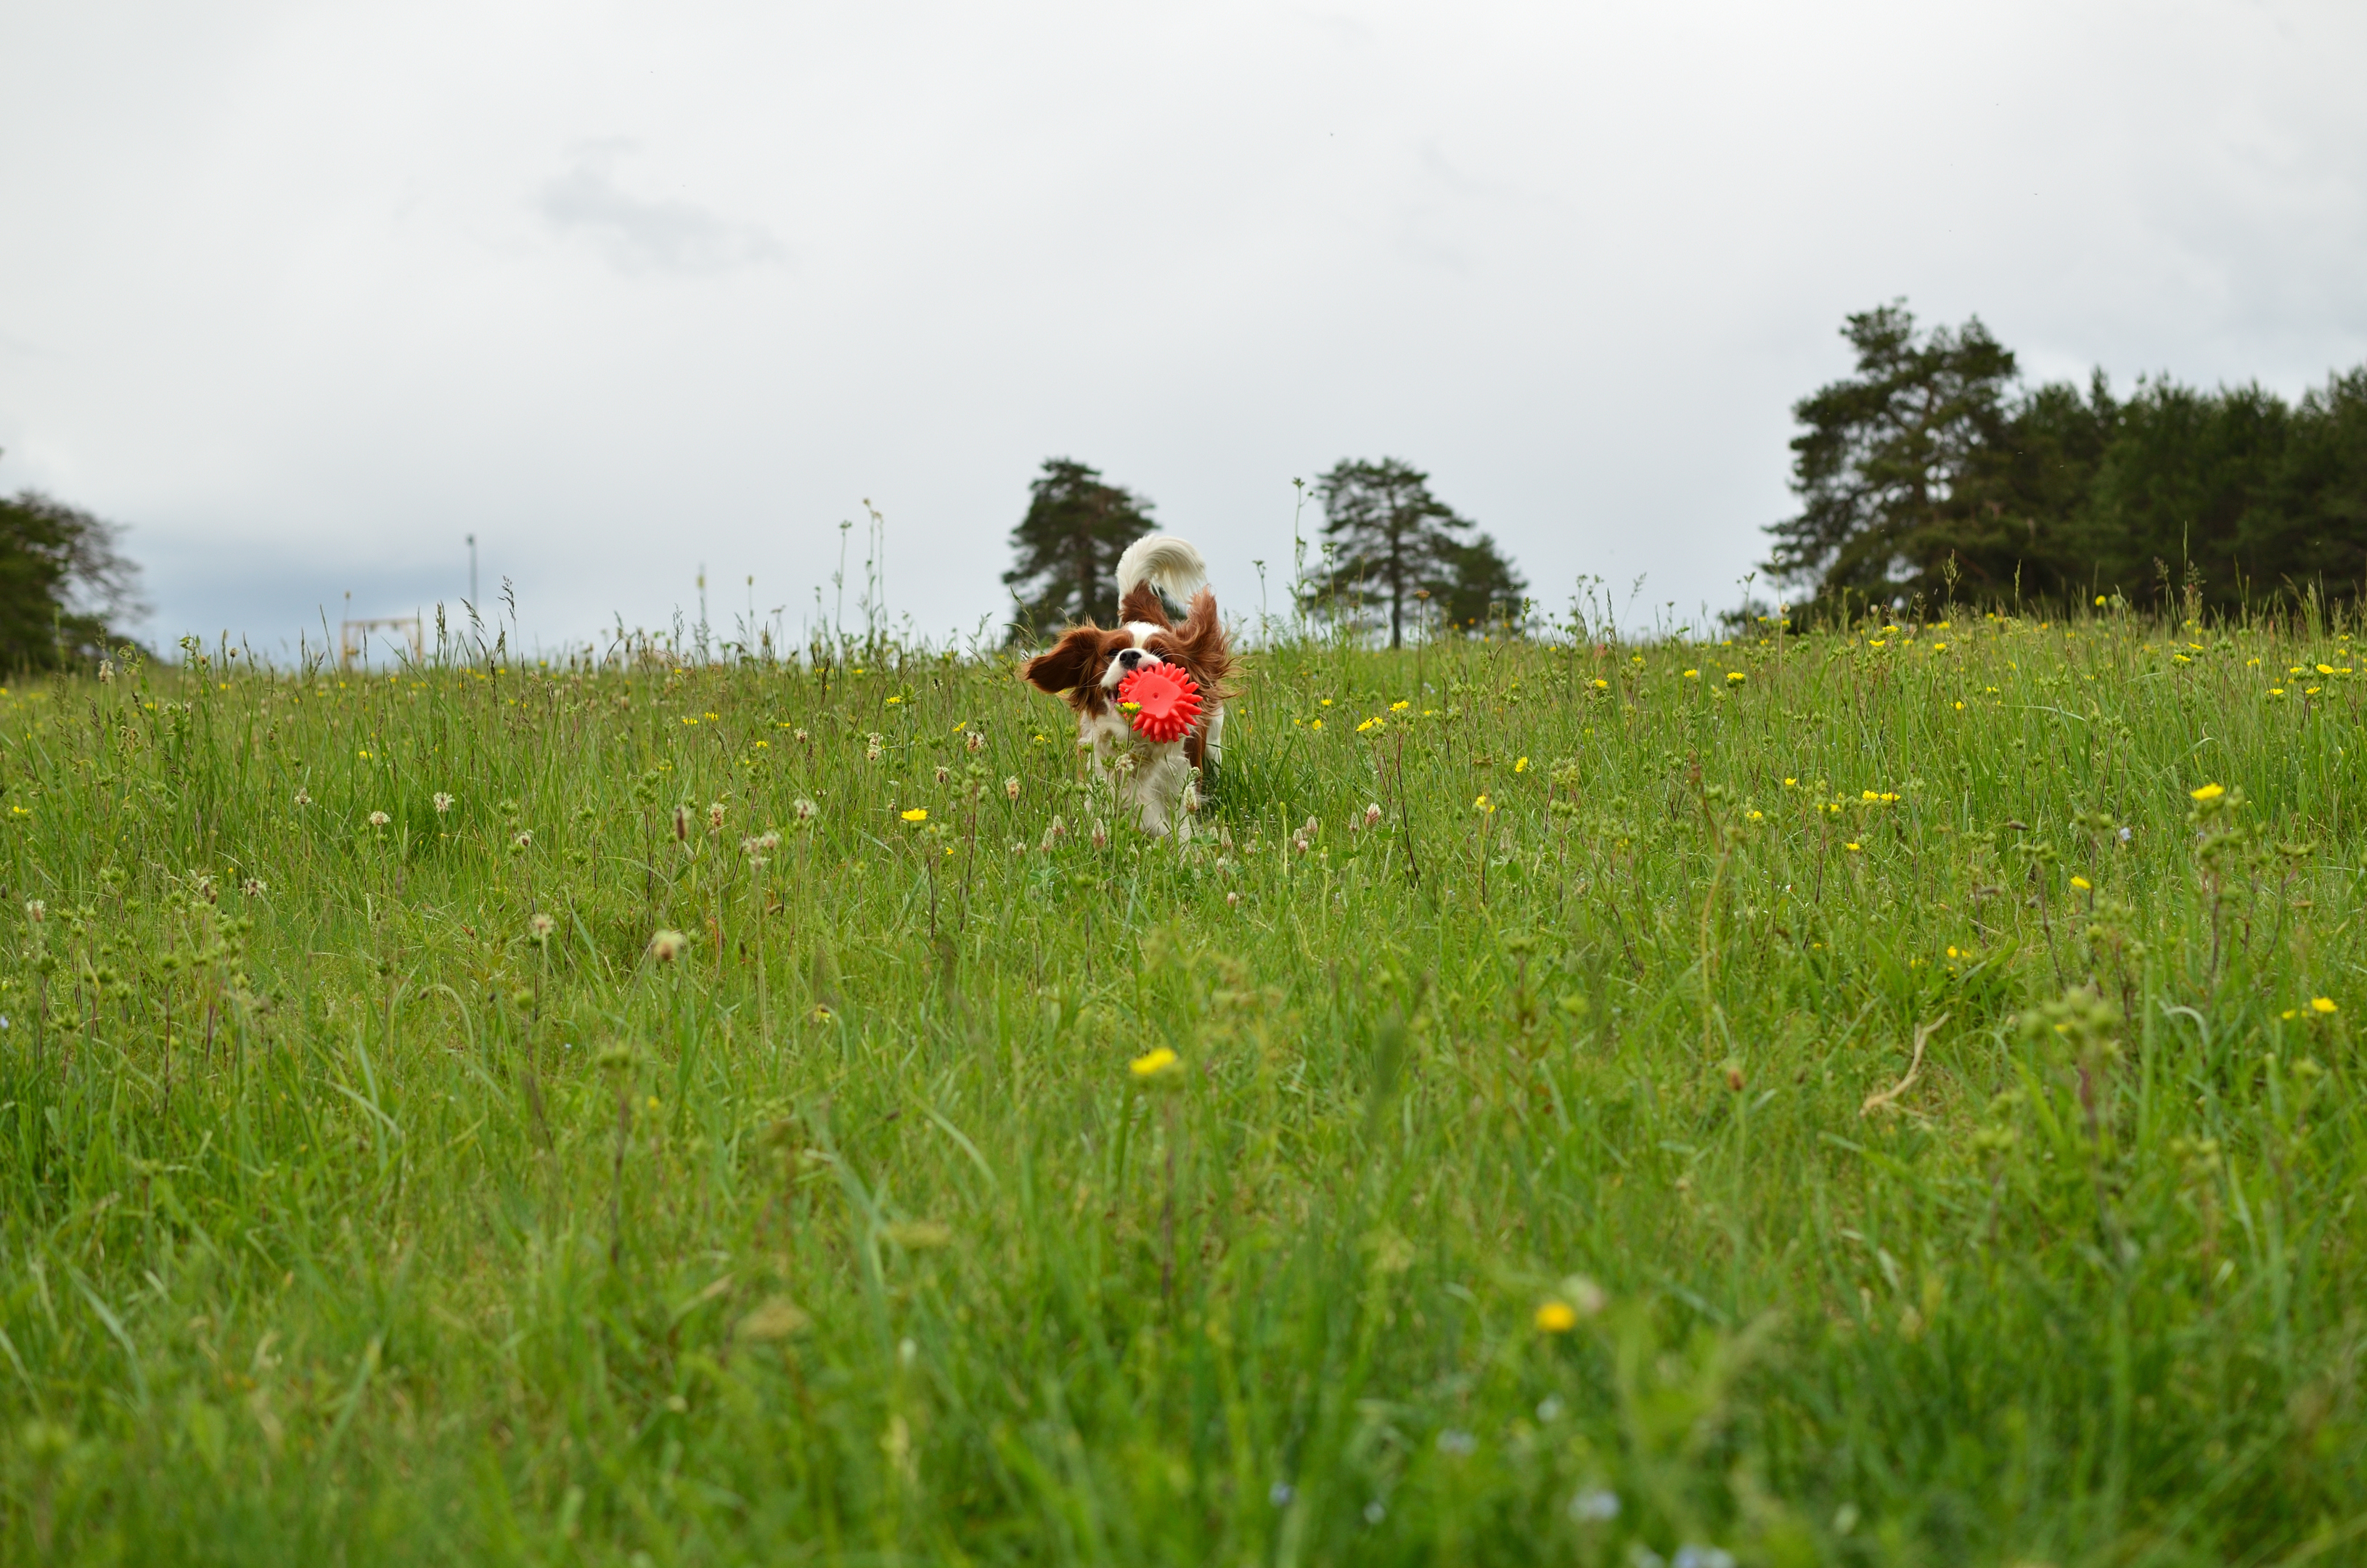 There are now thought to be a number of secure dog walking fields - a relatively new concept - across the UK.